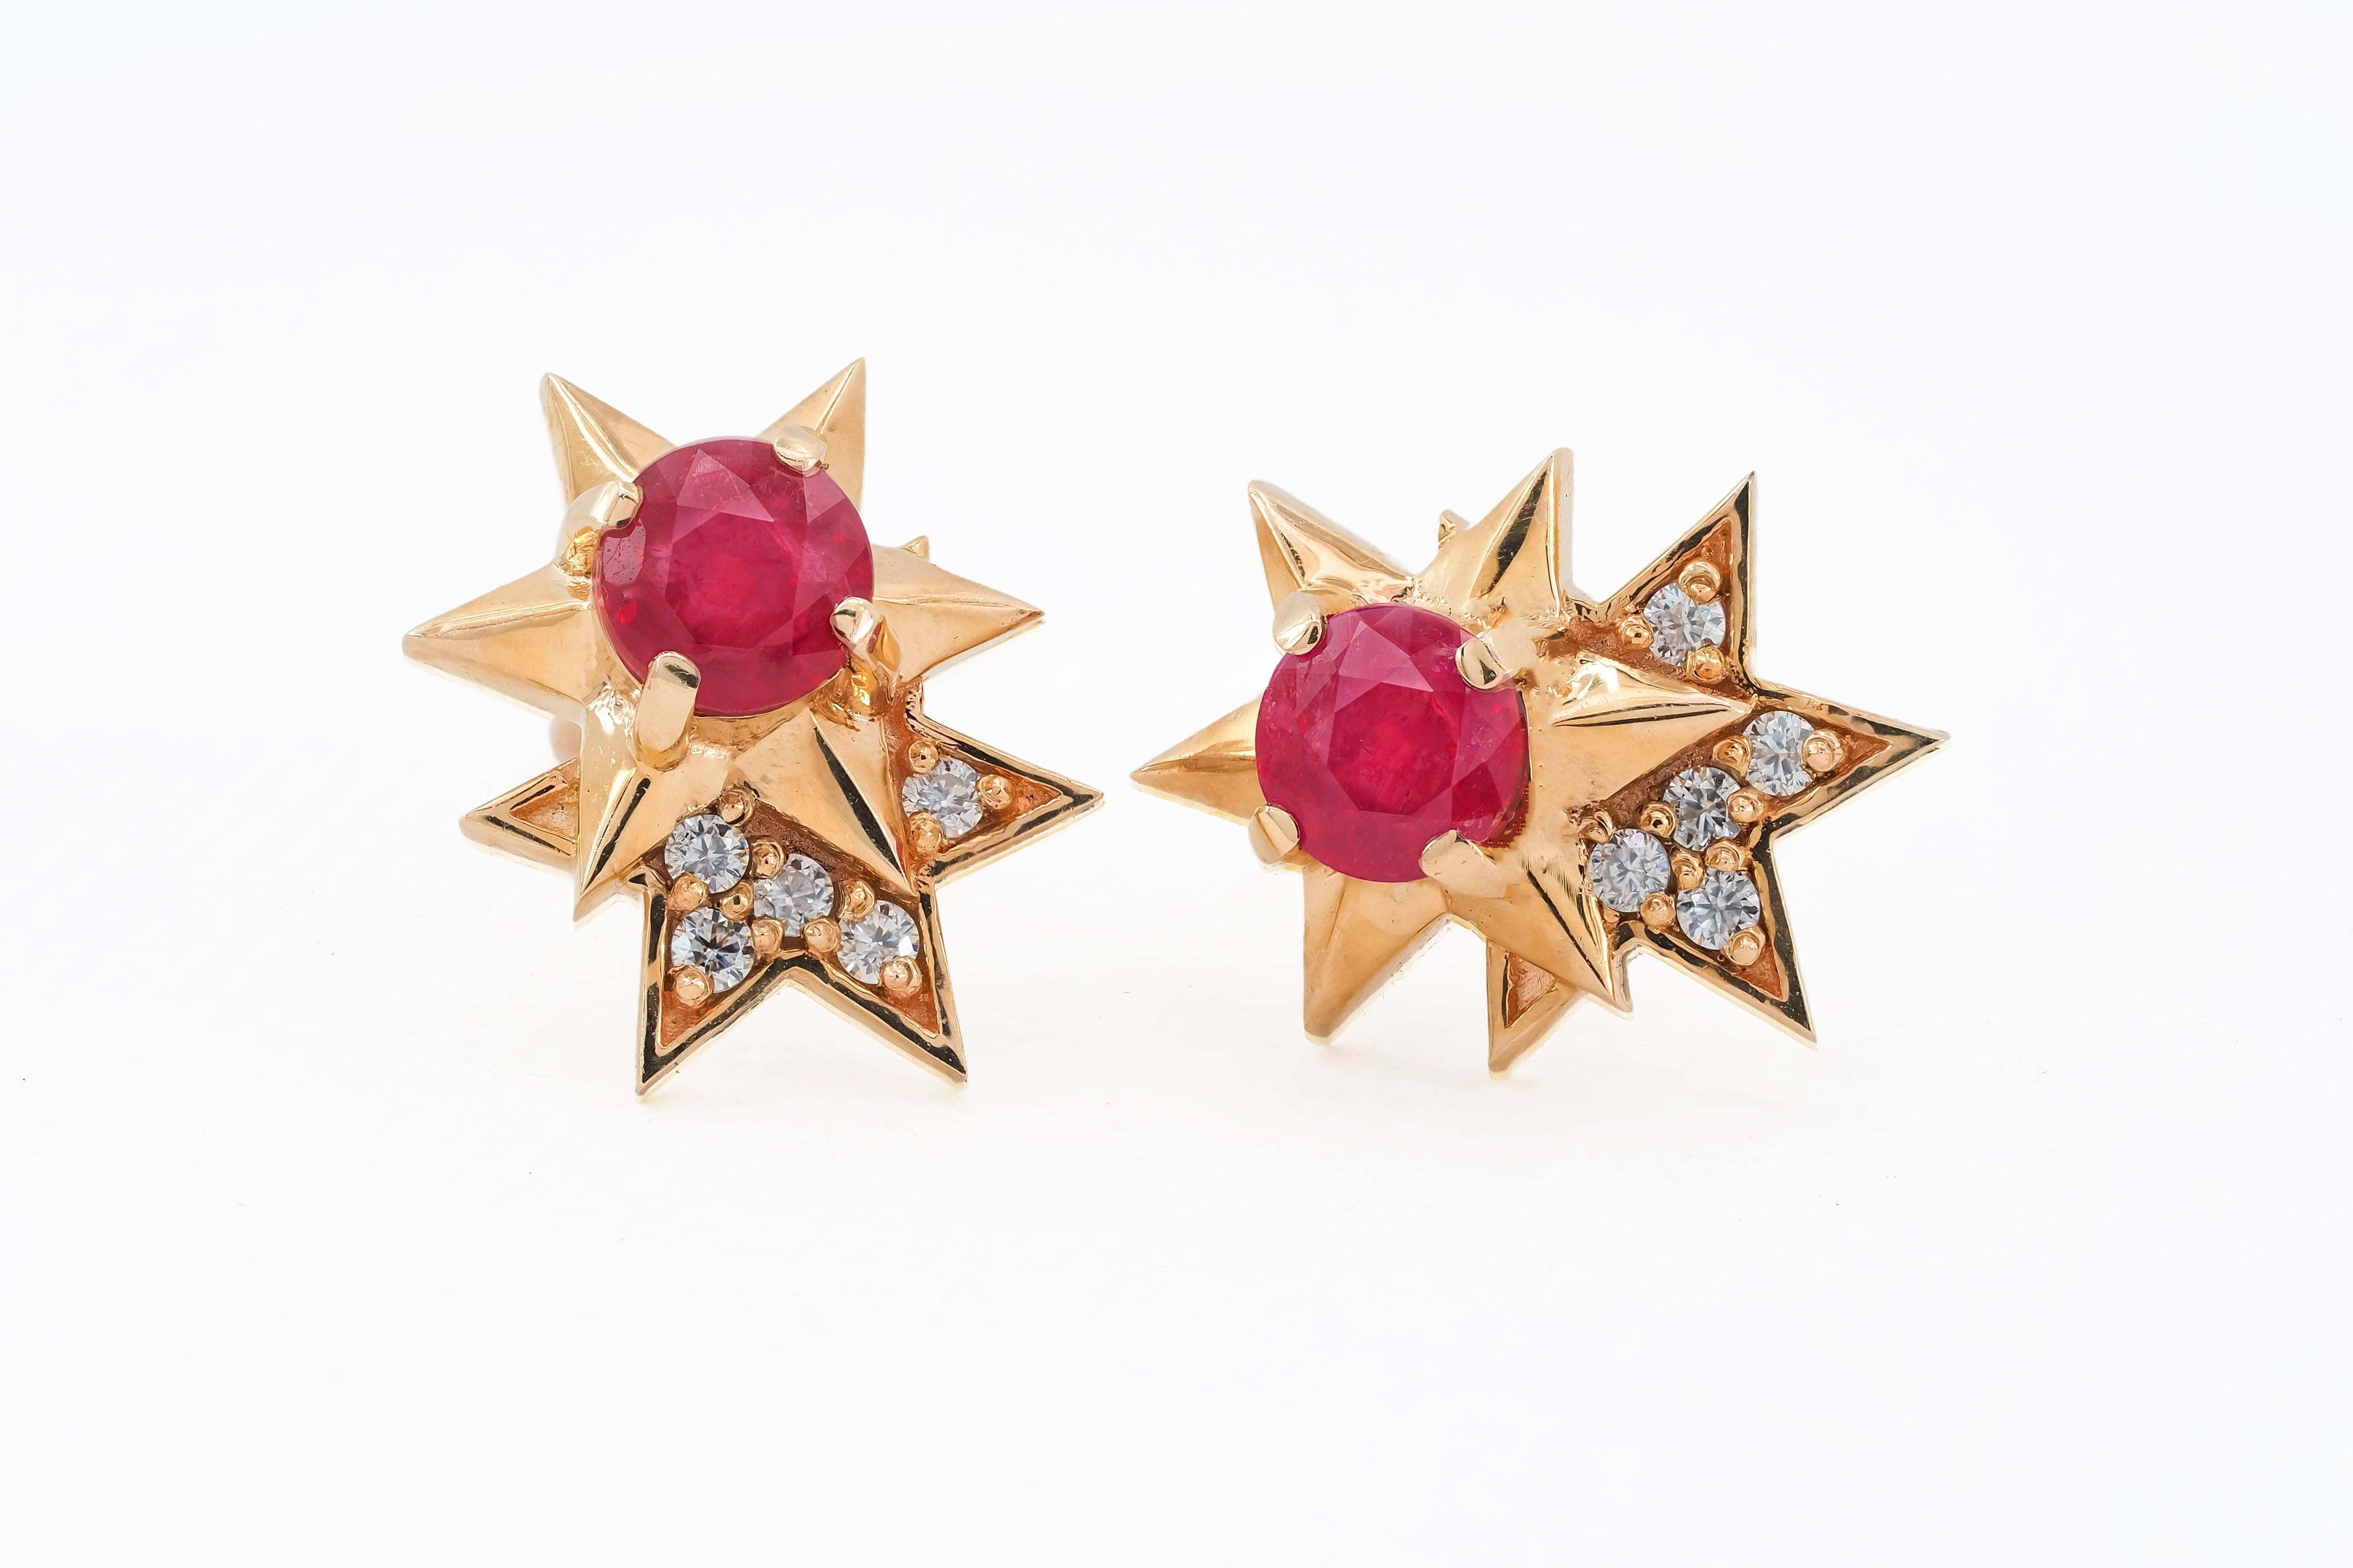 14 Karat Gold Earrings Studs with Rubies and Diamonds. Ruby stud earrings For Sale 7